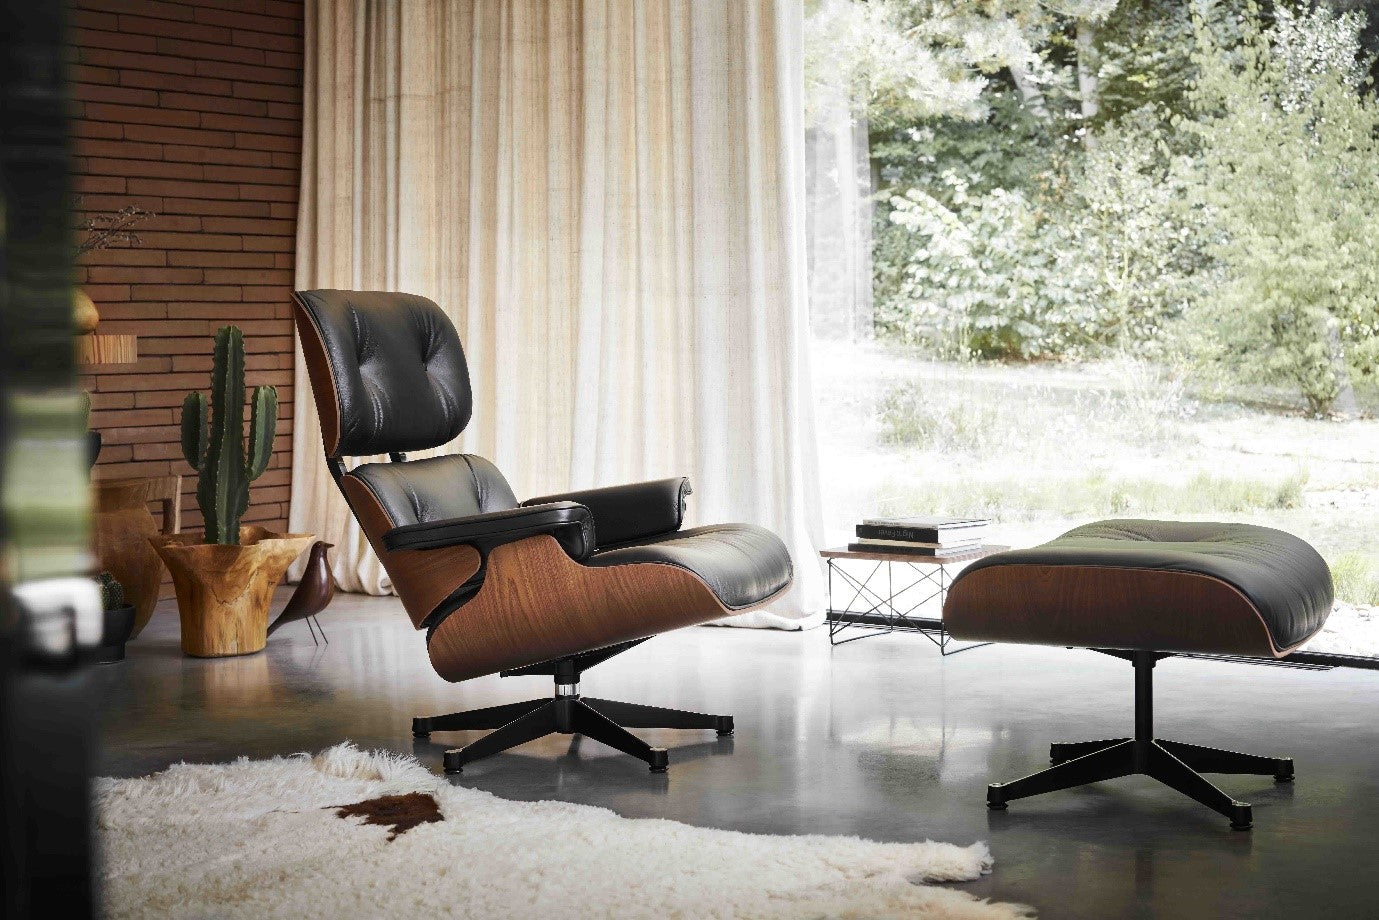 Lounge Chair by Charles & Ray Eames